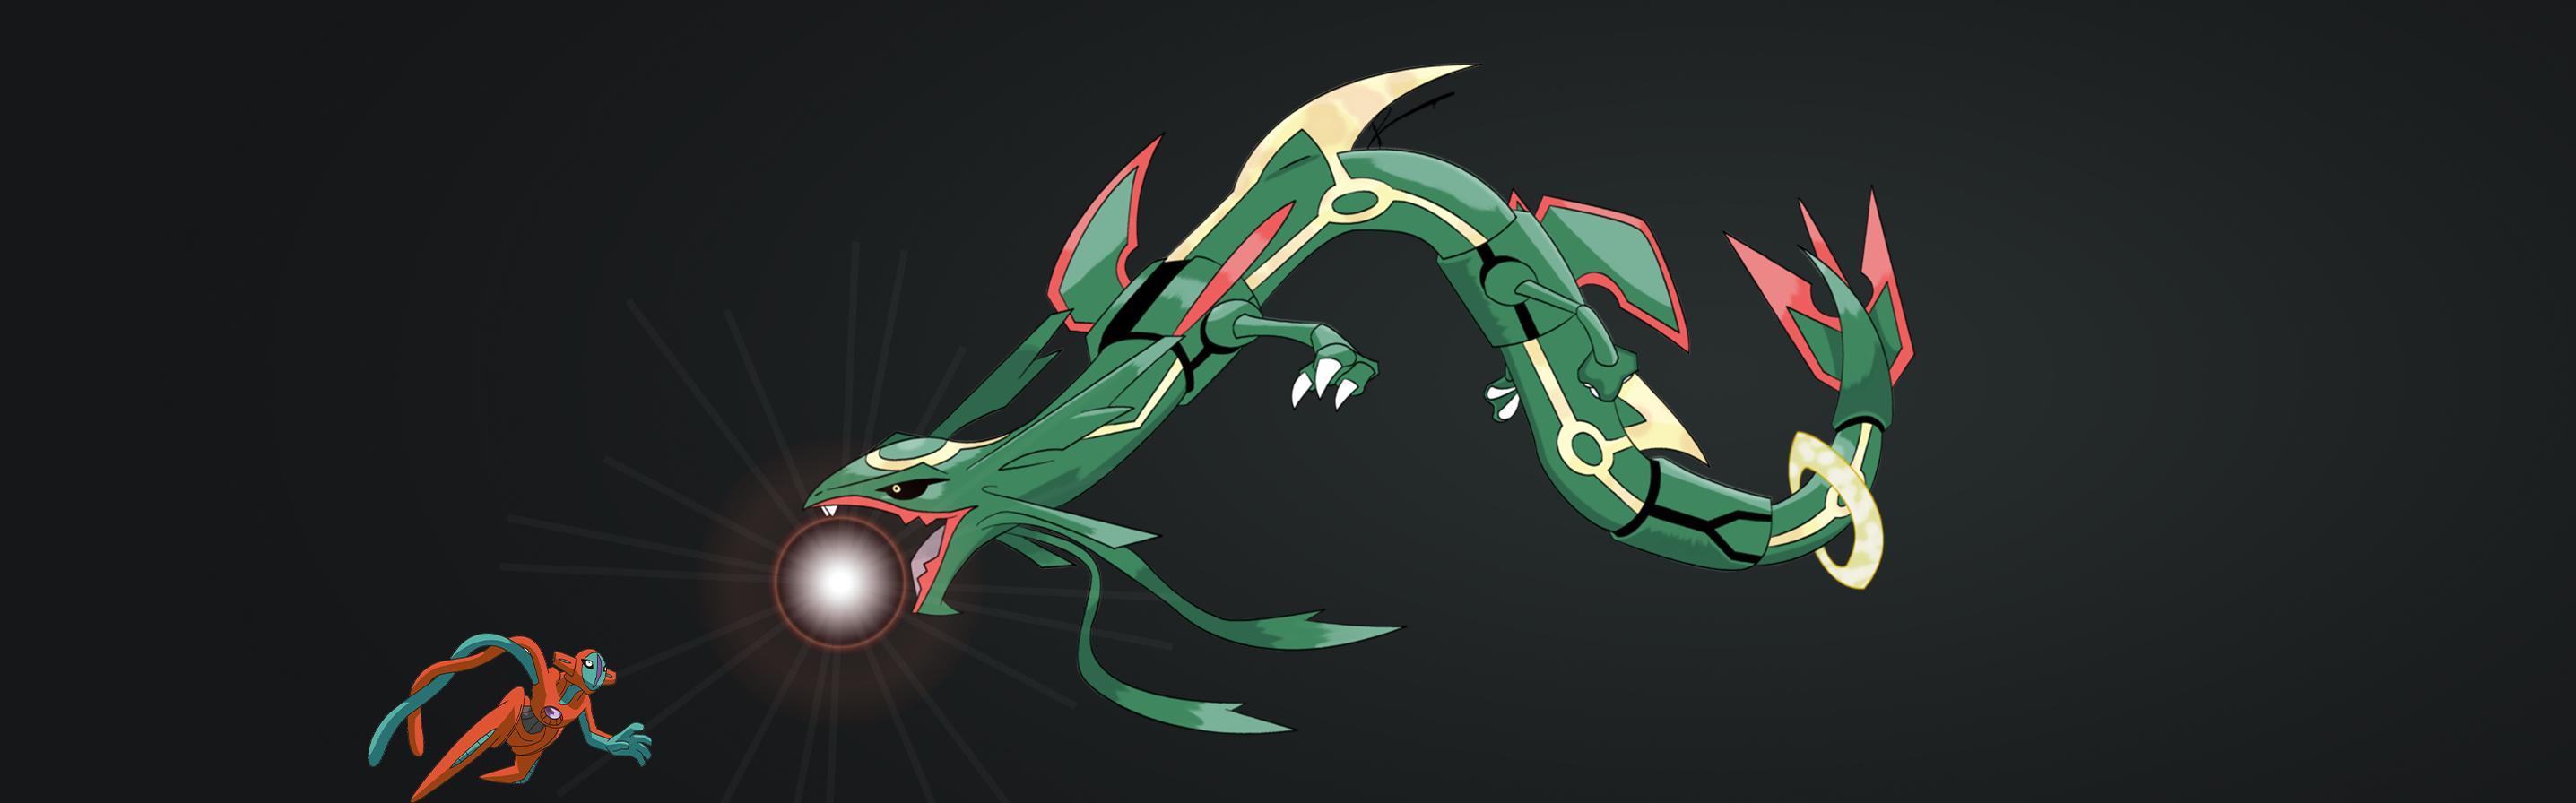 My Attempt at a Rayquaza vs. Deoxys Wallpaper, I'm not